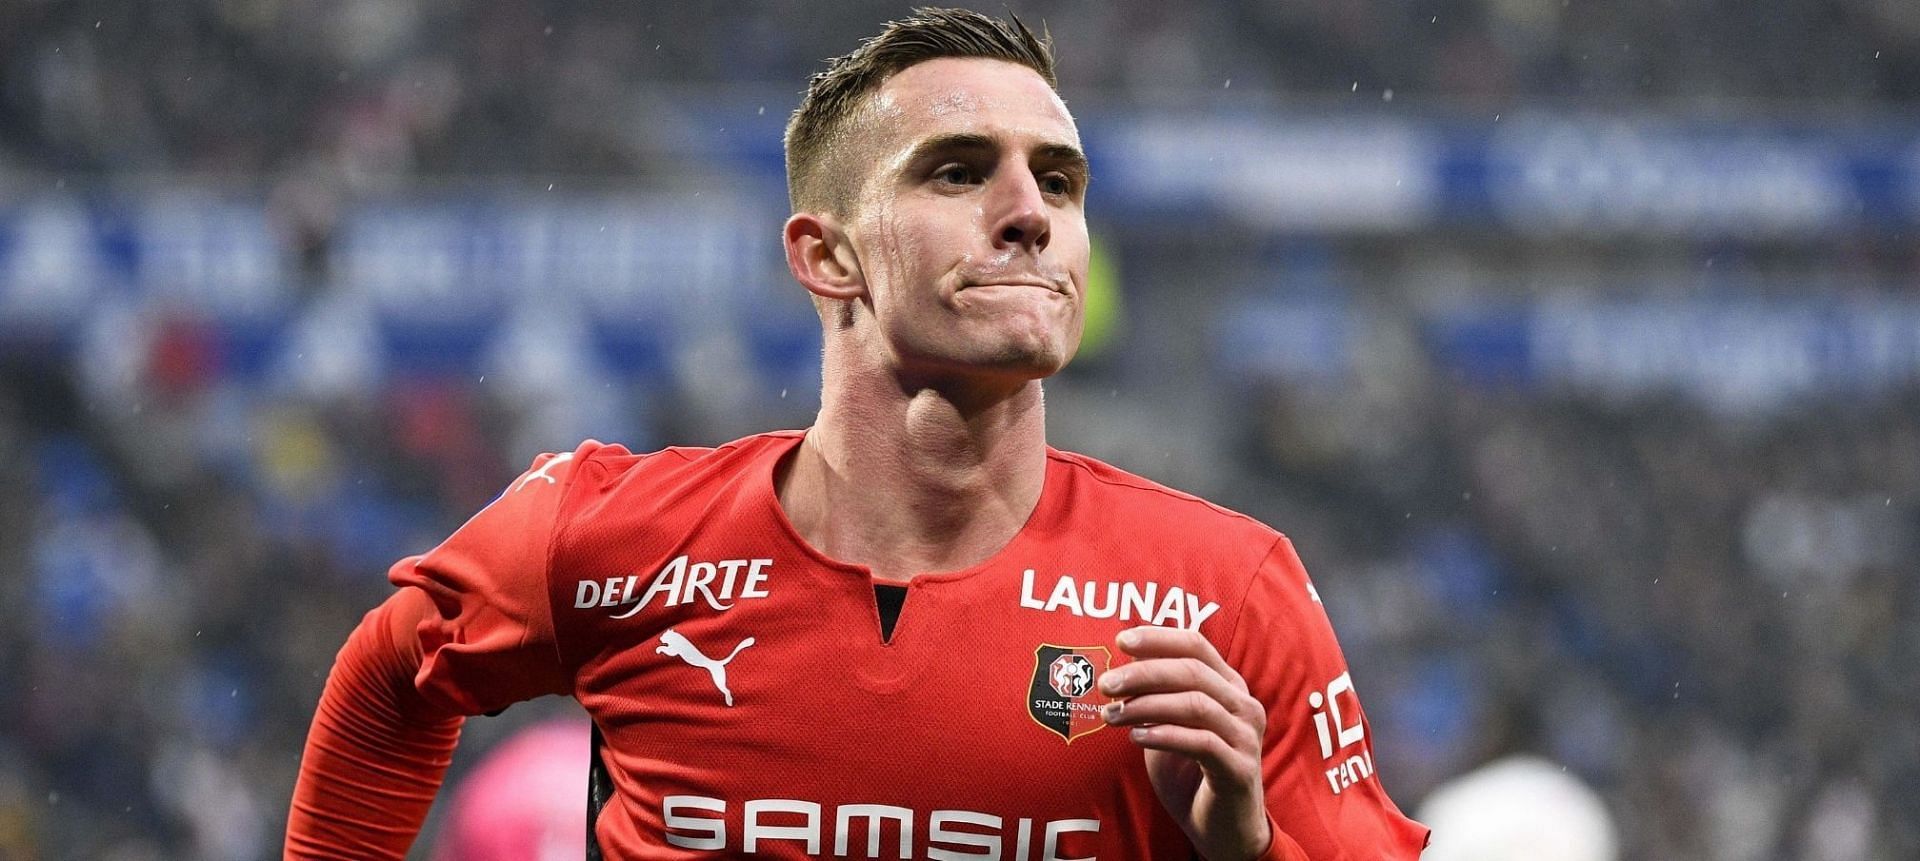 Going as far as possible: Benjamin Bourigeaud in Ligue 1 action.